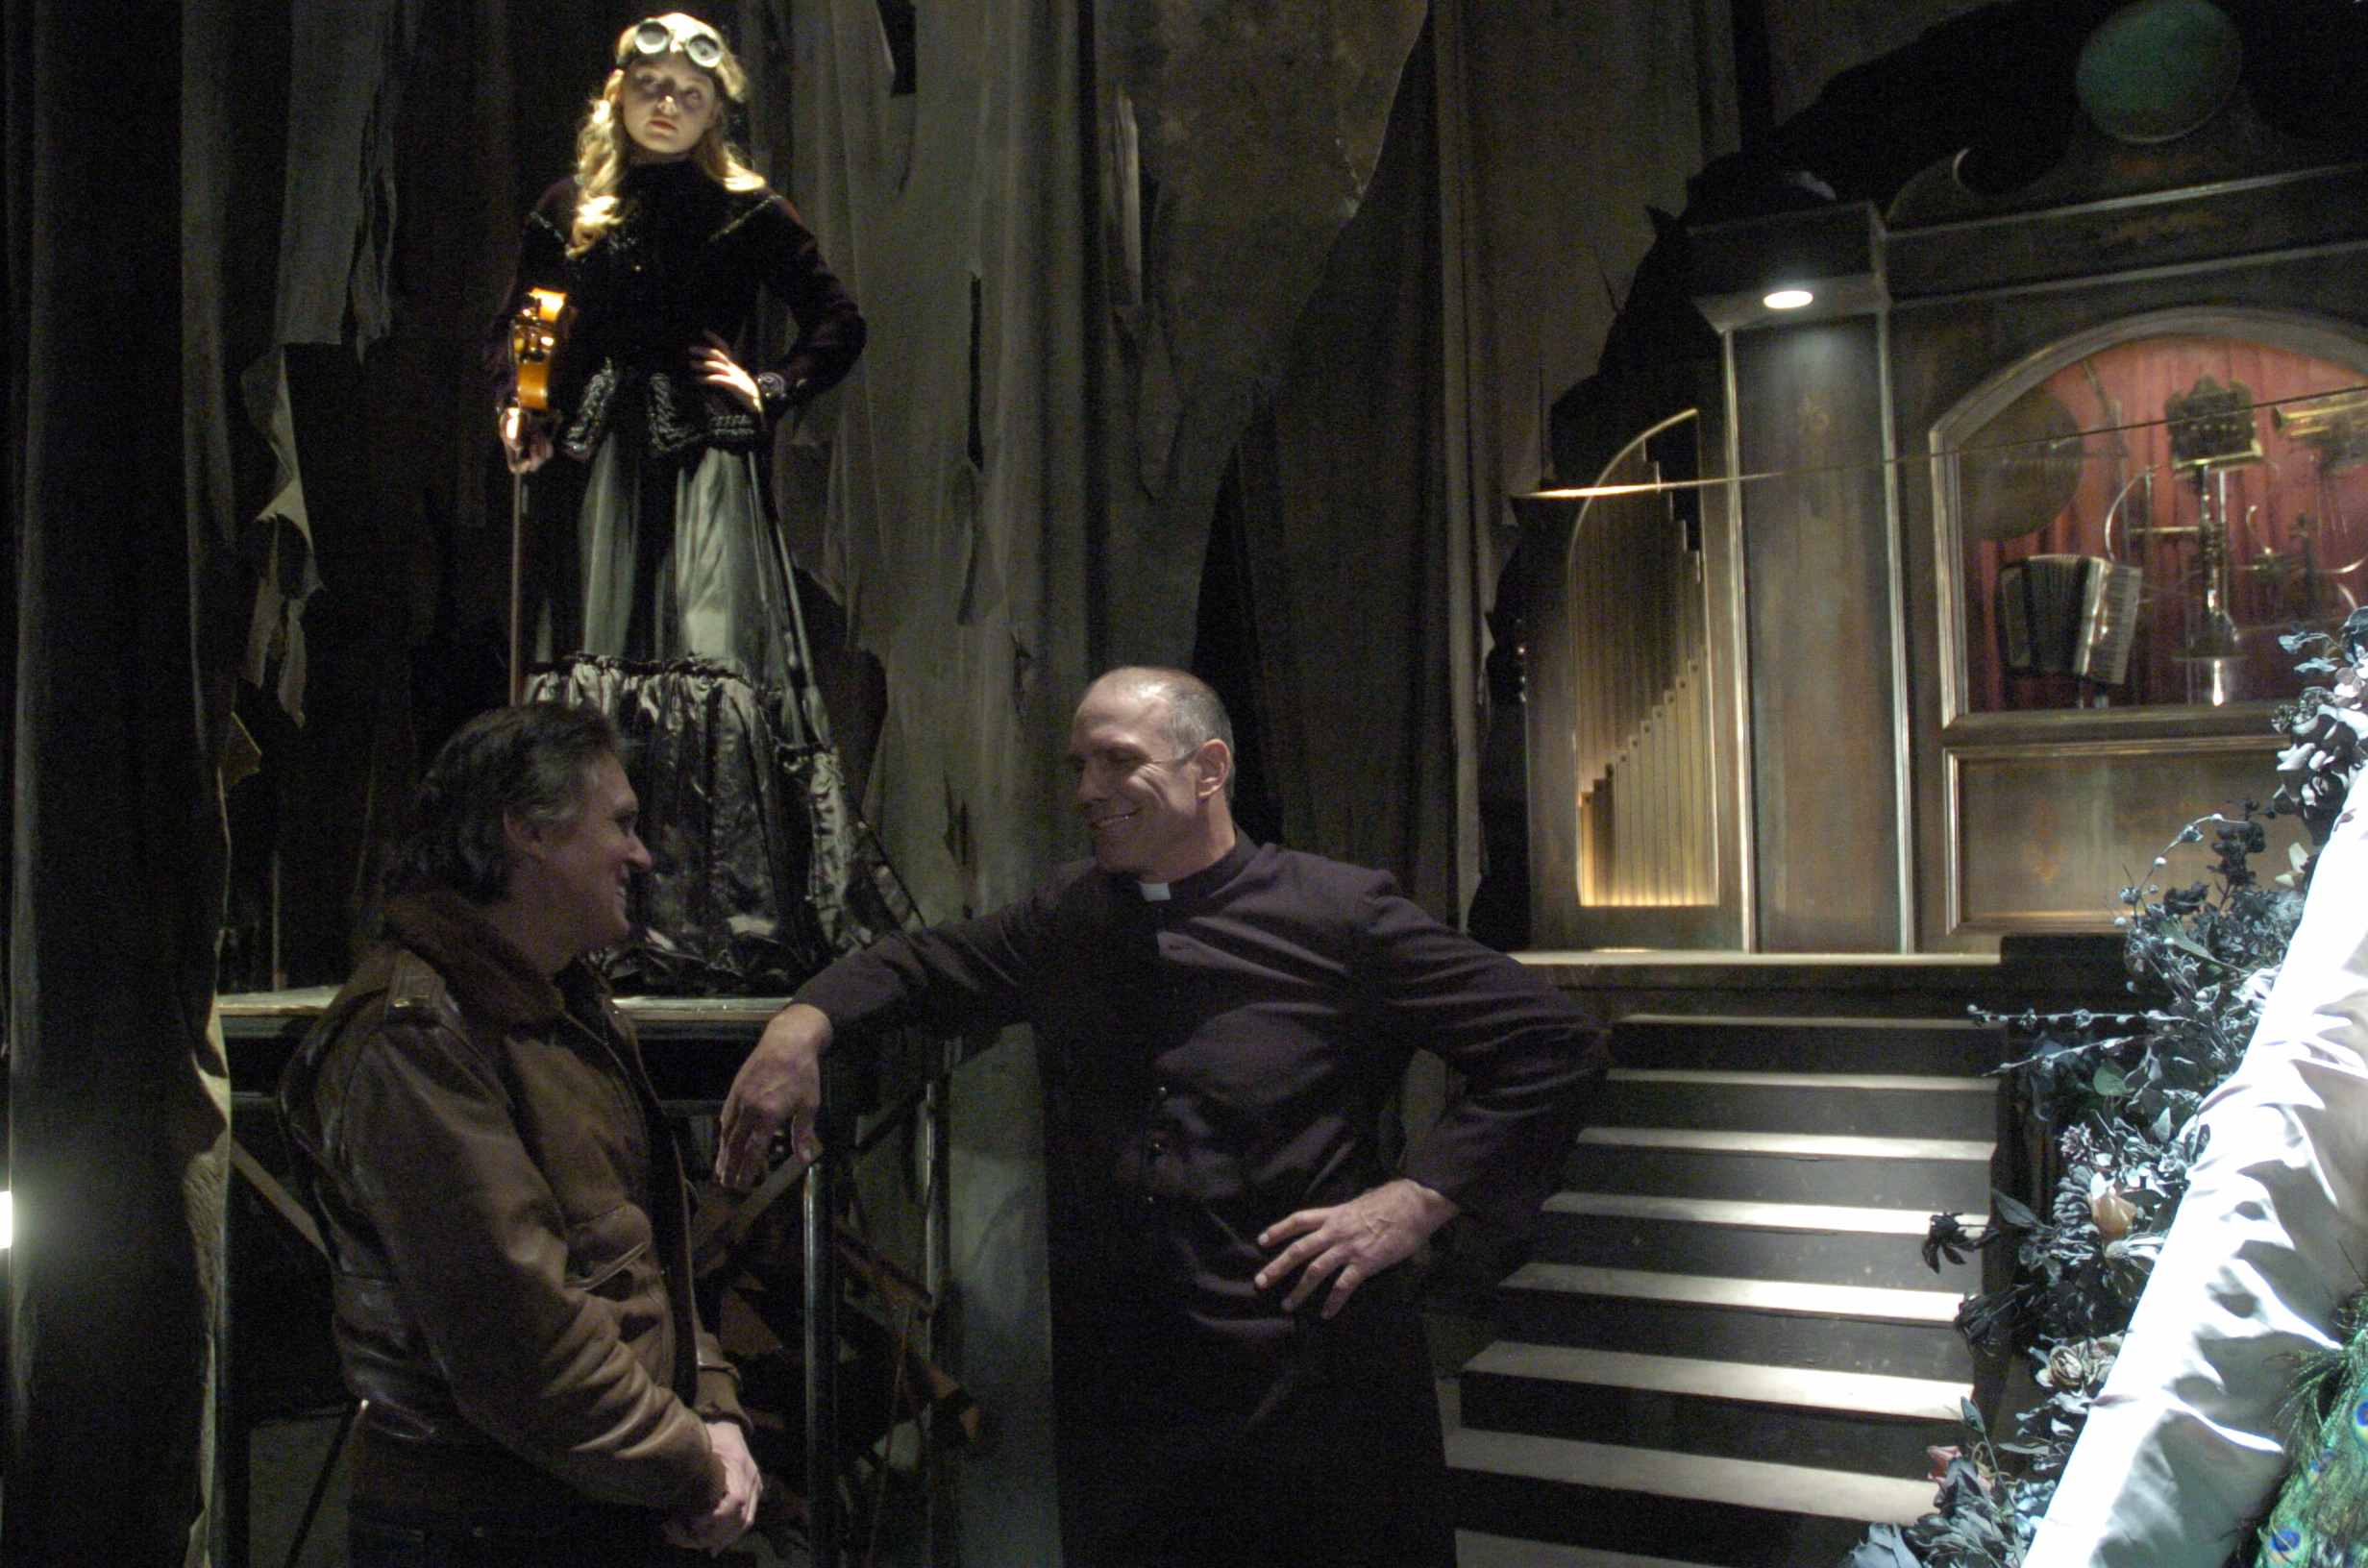 On the Automaton Set William Malone discusses scene with Patrick Kilpatrick. From PARASOMNIA